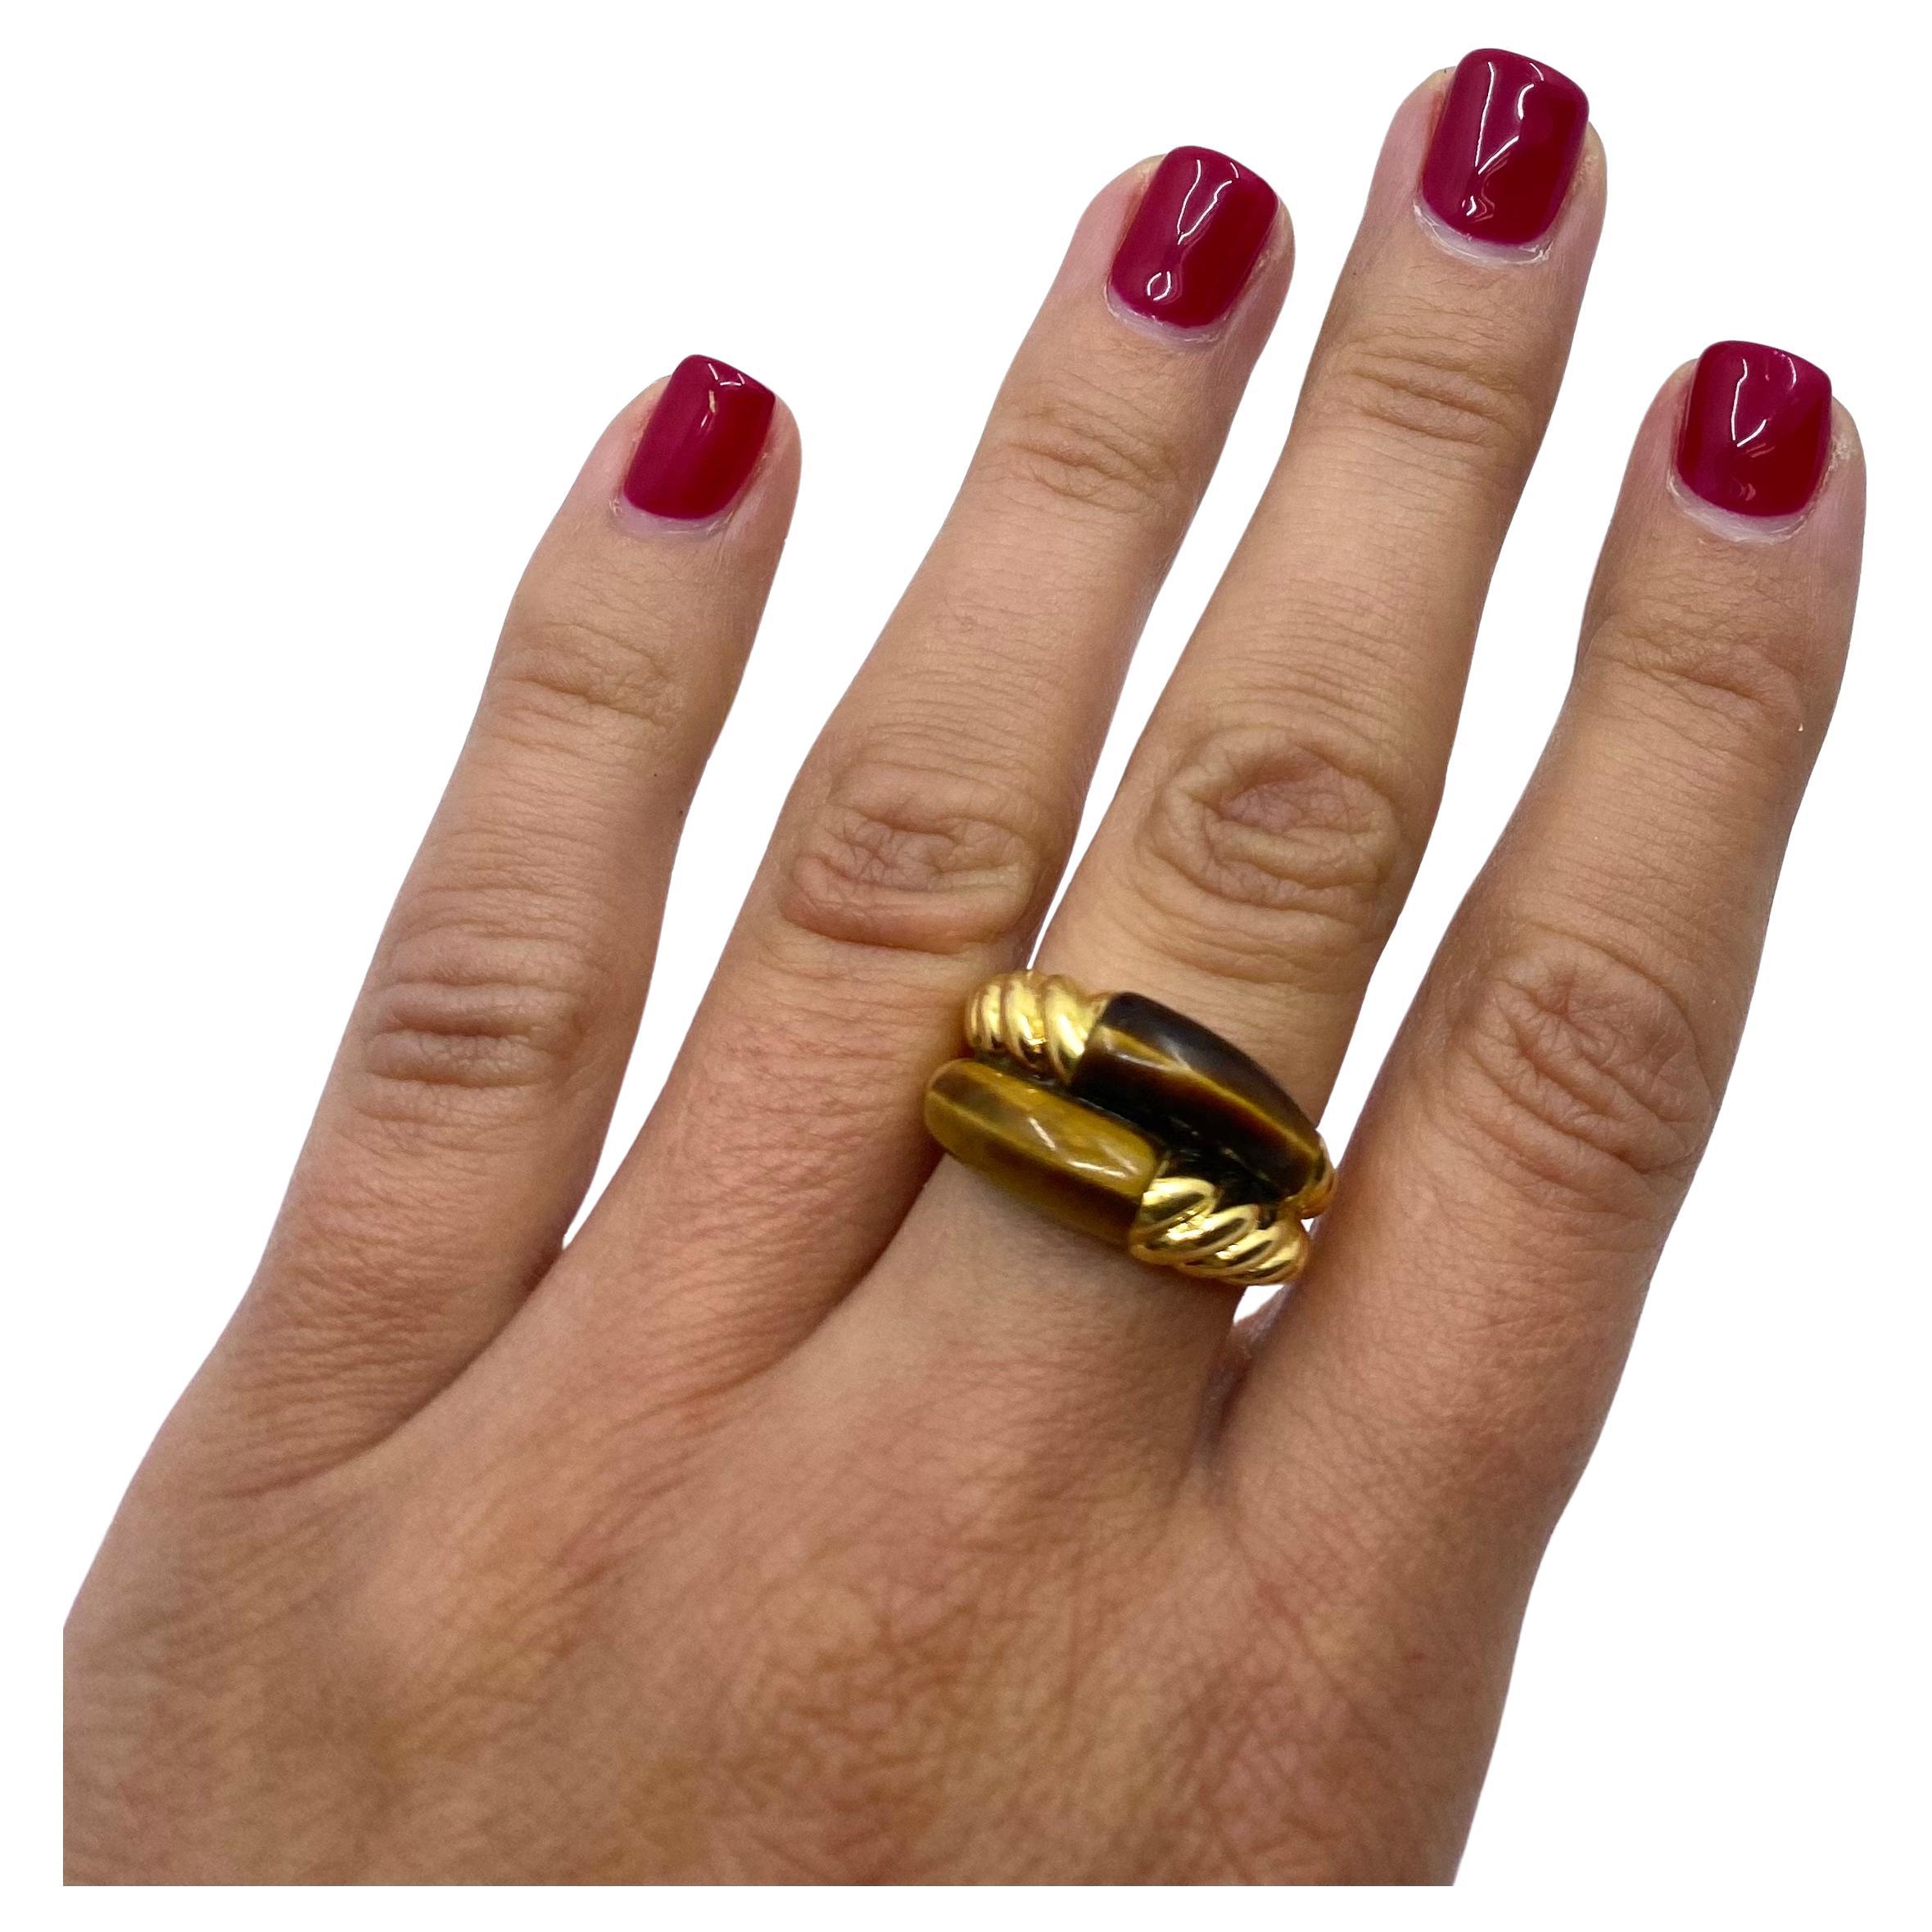 A unique vintage ring by Van Cleef & Arpels made of 18k gold and a tiger’s eye. The ring perfectly displays a gorgeous luster of the tiger’s eye. The gem’s glossy beauty is enhanced with a polished gold swirl element which is a distinctive feature